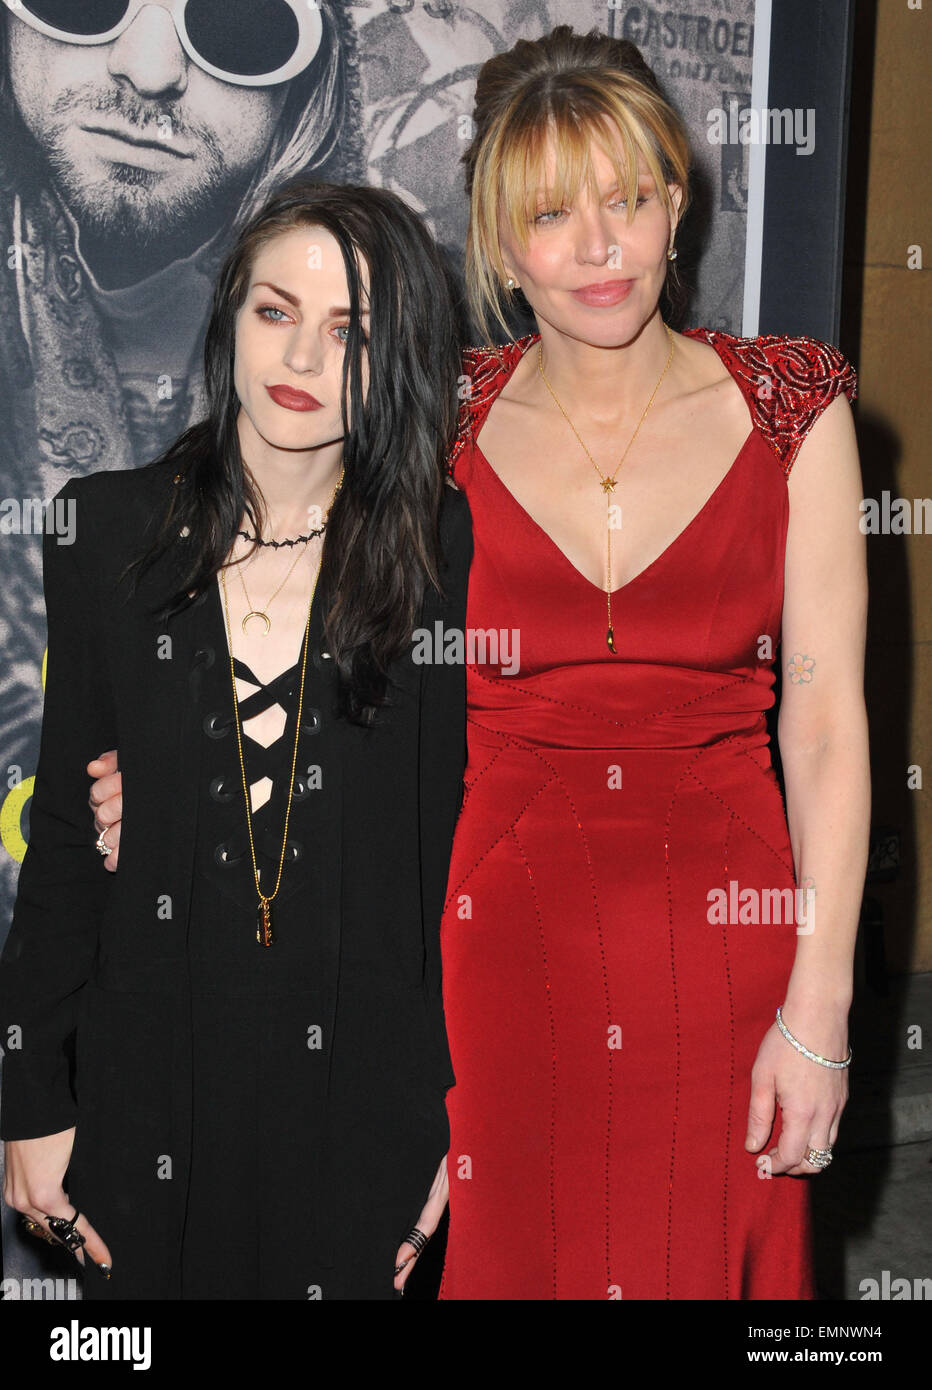 Los Angeles, California, USA. 21st Apr, 2015. FRANCES BEAN COBIAN, COURTNEY LOVE attending the Los Angeles Premiere of ''Kurt Cobain: Montage Of Heck'' held at the Egyptian Theatre. © D. Long/Globe Photos/ZUMA Wire/Alamy Live News Stock Photo